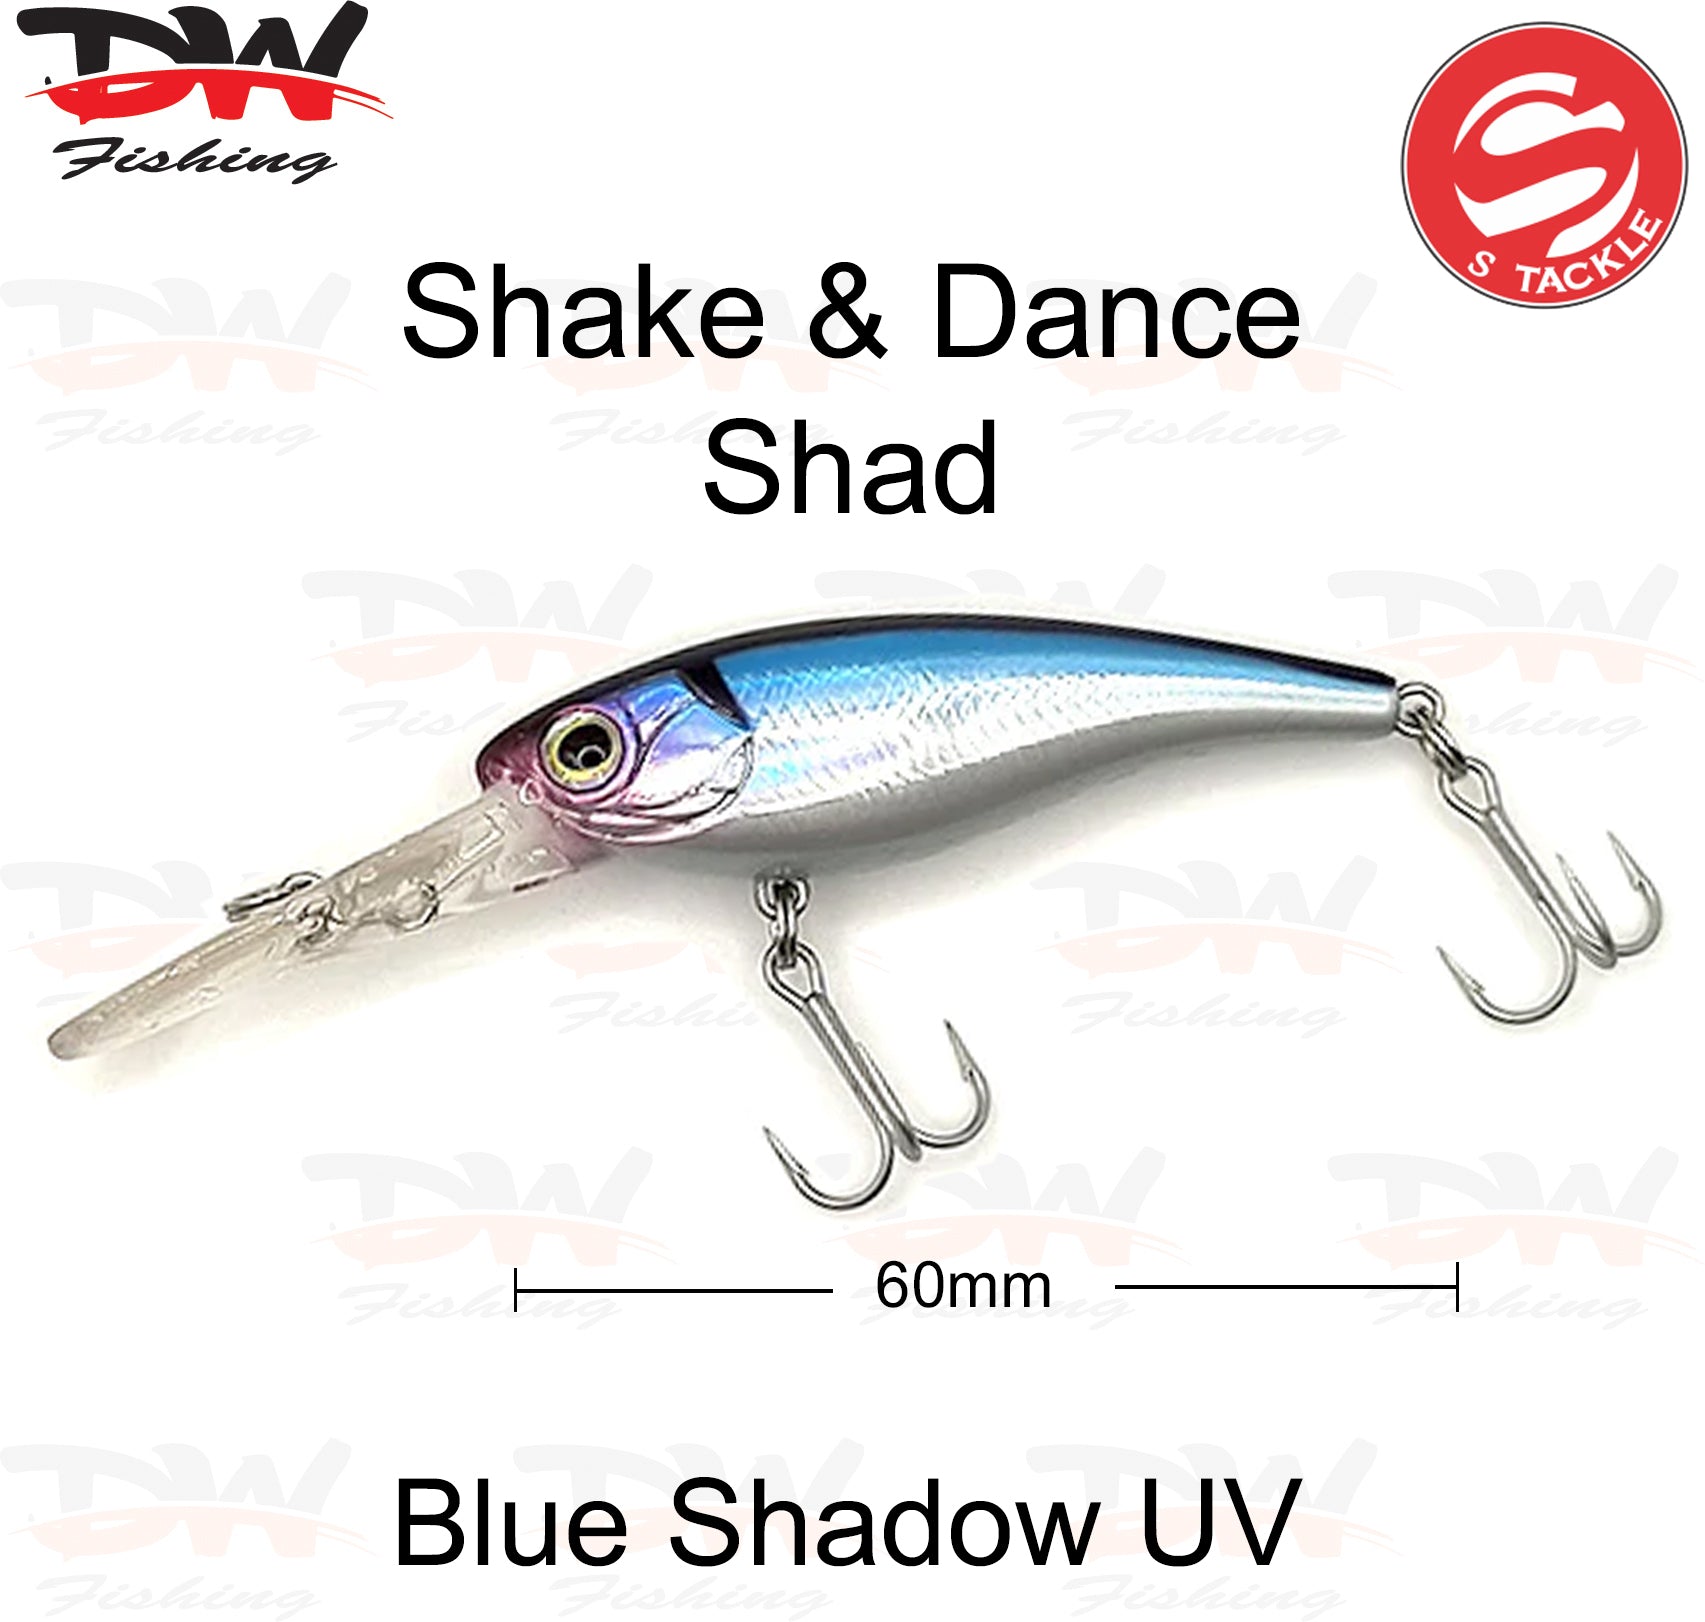 The Shake and Dance Hard Body 60mm lure colour is Blue Shadow UV